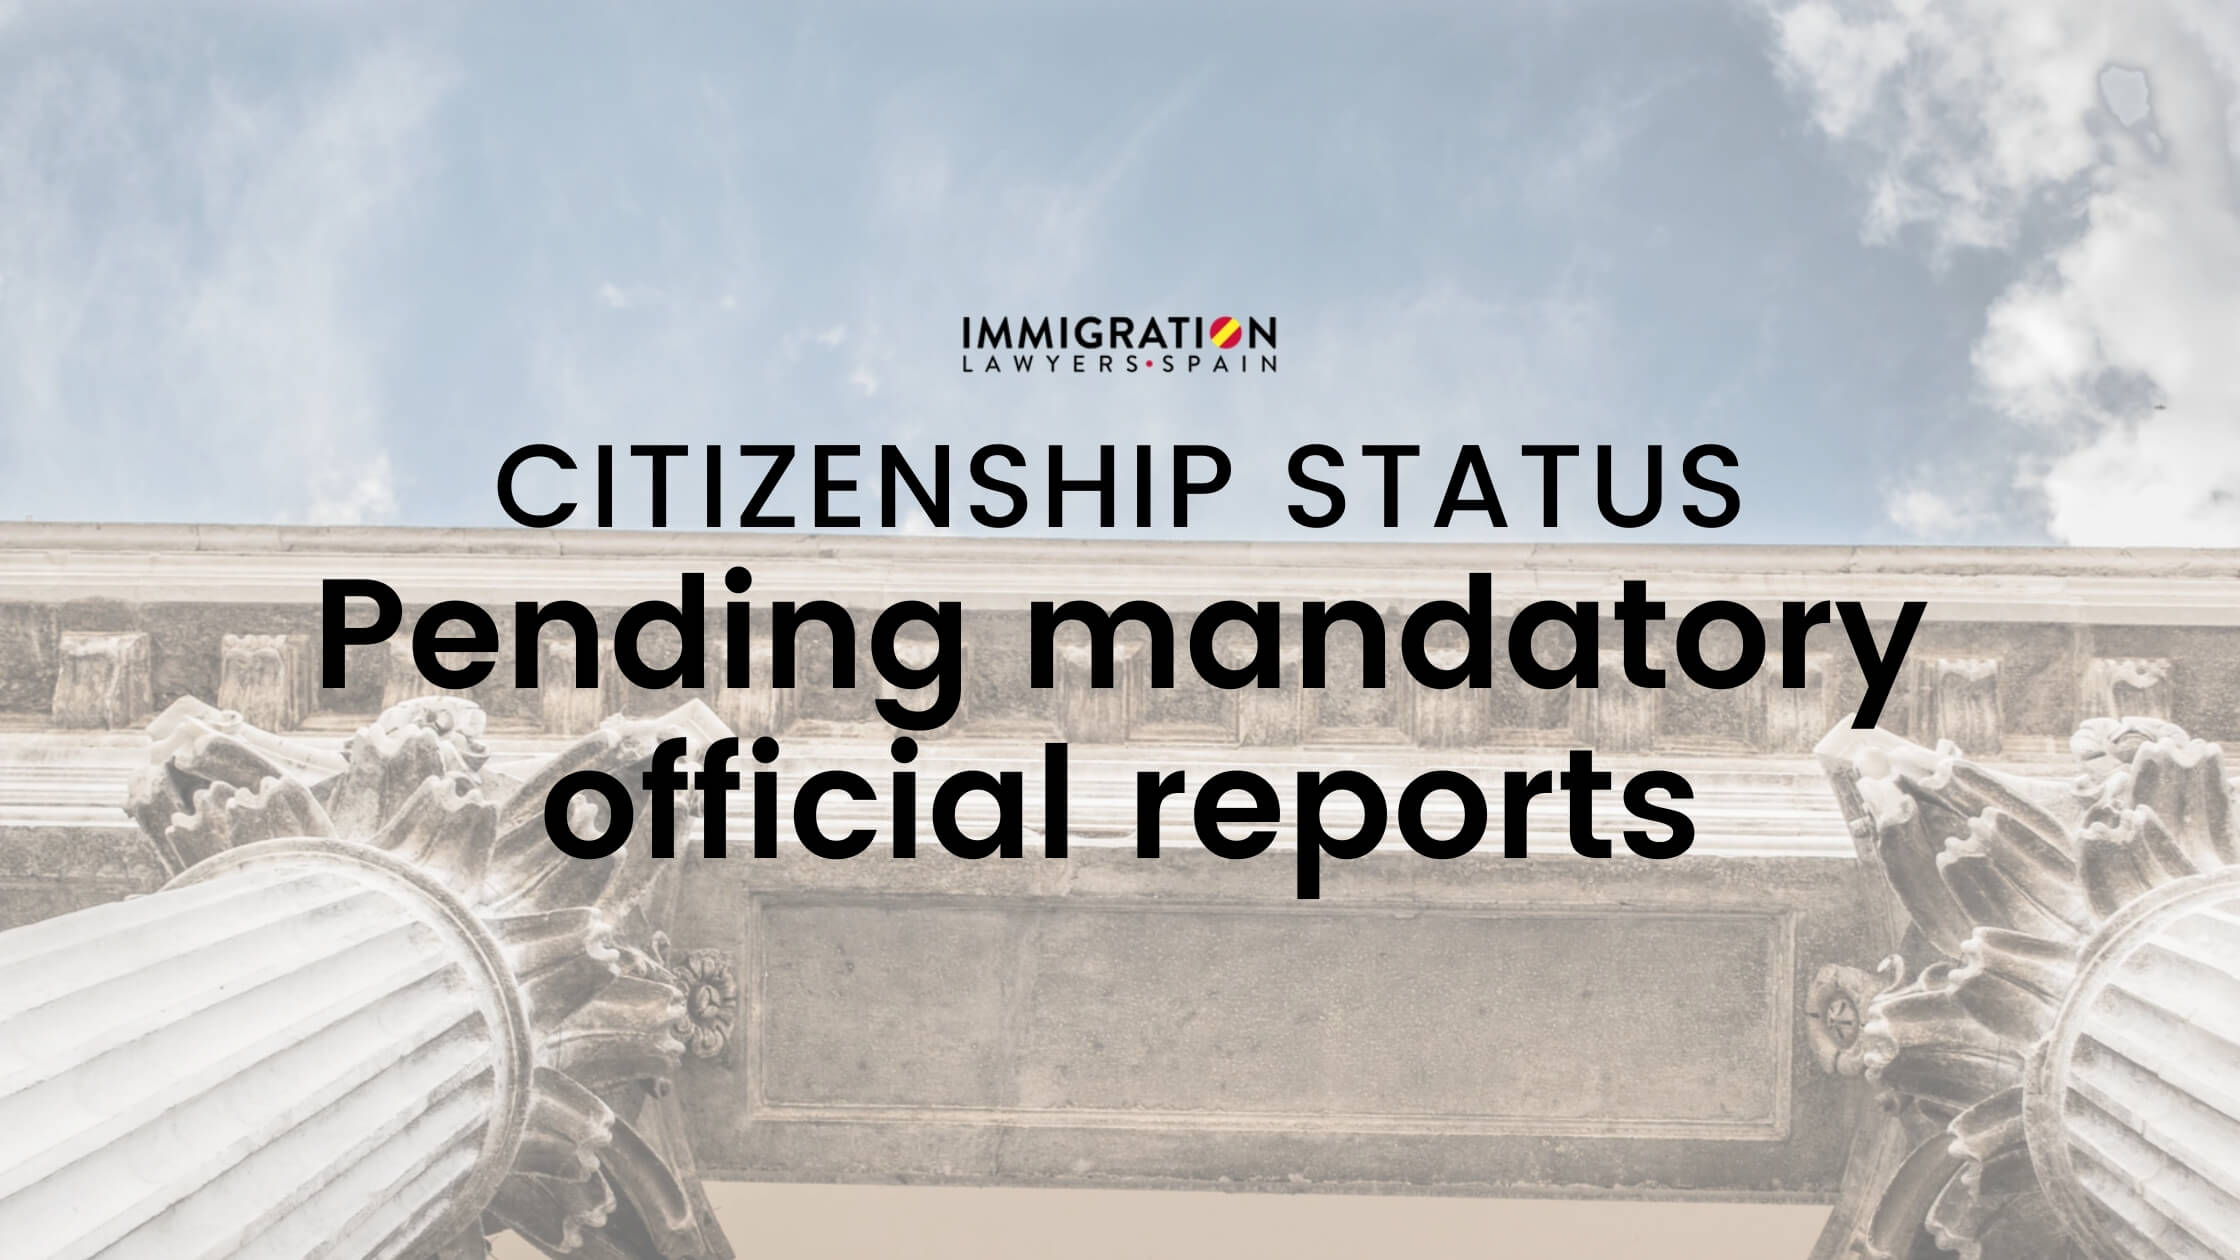 mandatory official reports citizenship